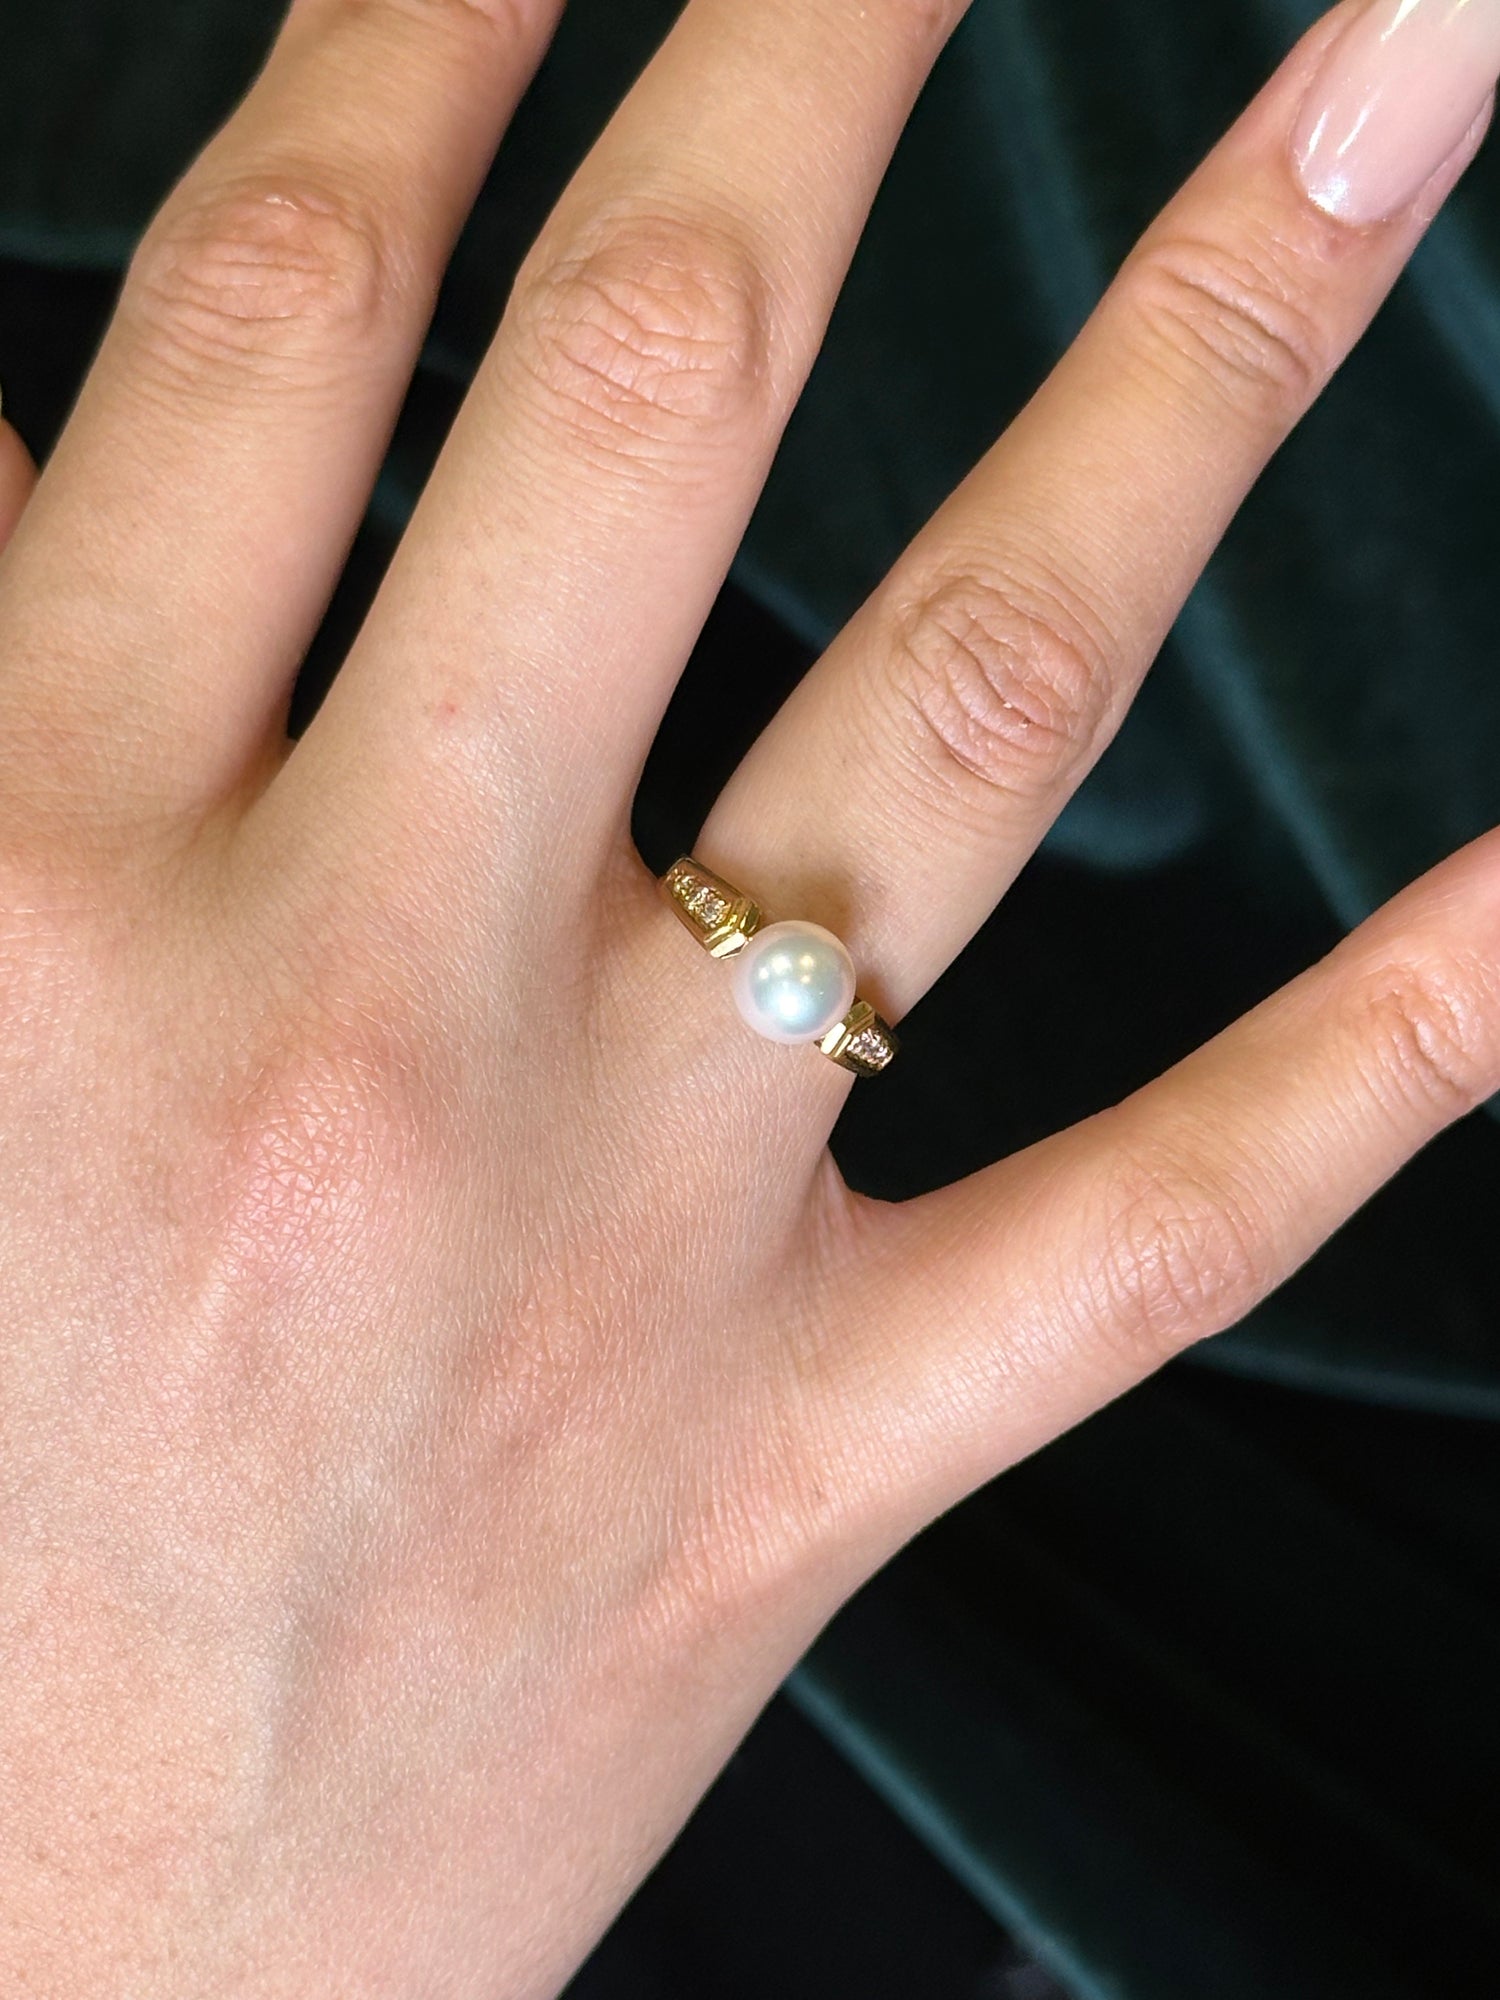 Pearl and Diamond Ring | 0.12 ctw SZ 6.25 |